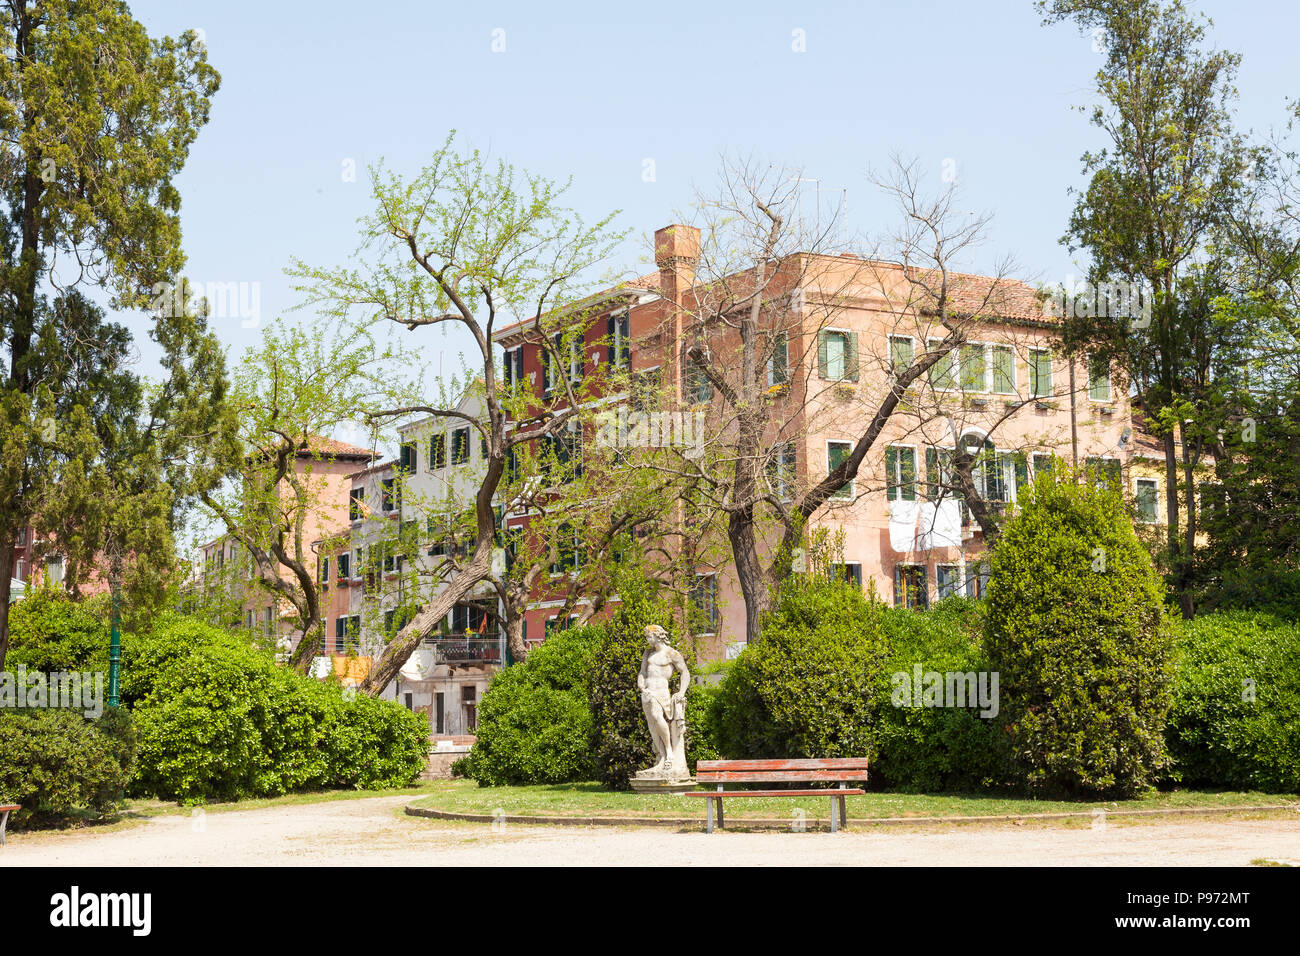 Statue in the Giardini Pubblici or Public Gardens, Castello, Venice, Veneto, italy in spring with a bench, greenery and trees backed by historic build Stock Photo